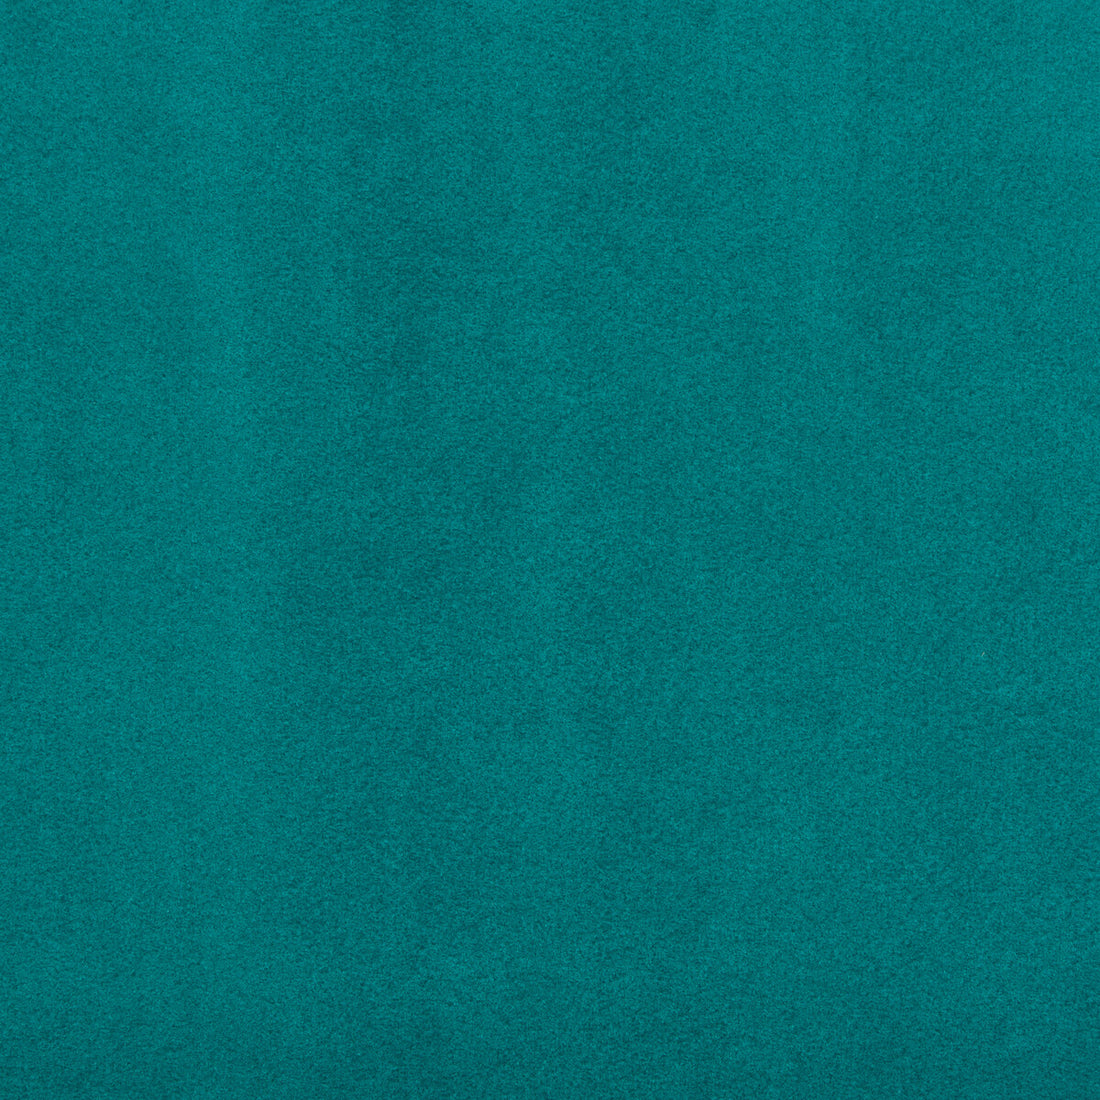 Ultimate fabric in teal color - pattern 960122.3535.0 - by Lee Jofa in the Ultimate Suede collection